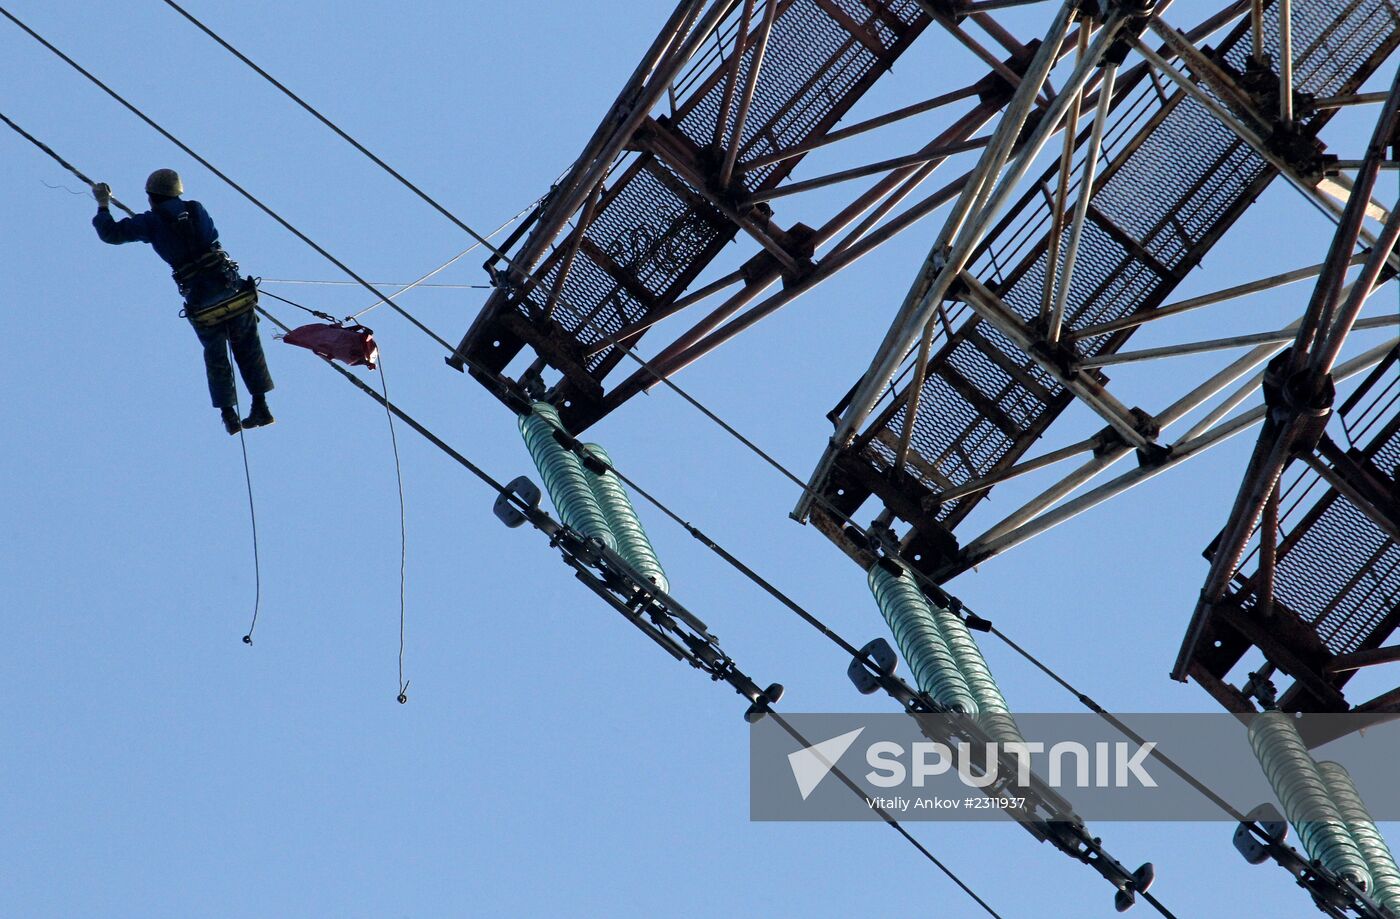 Repairing power lines from mainland to Russian island in Primorye